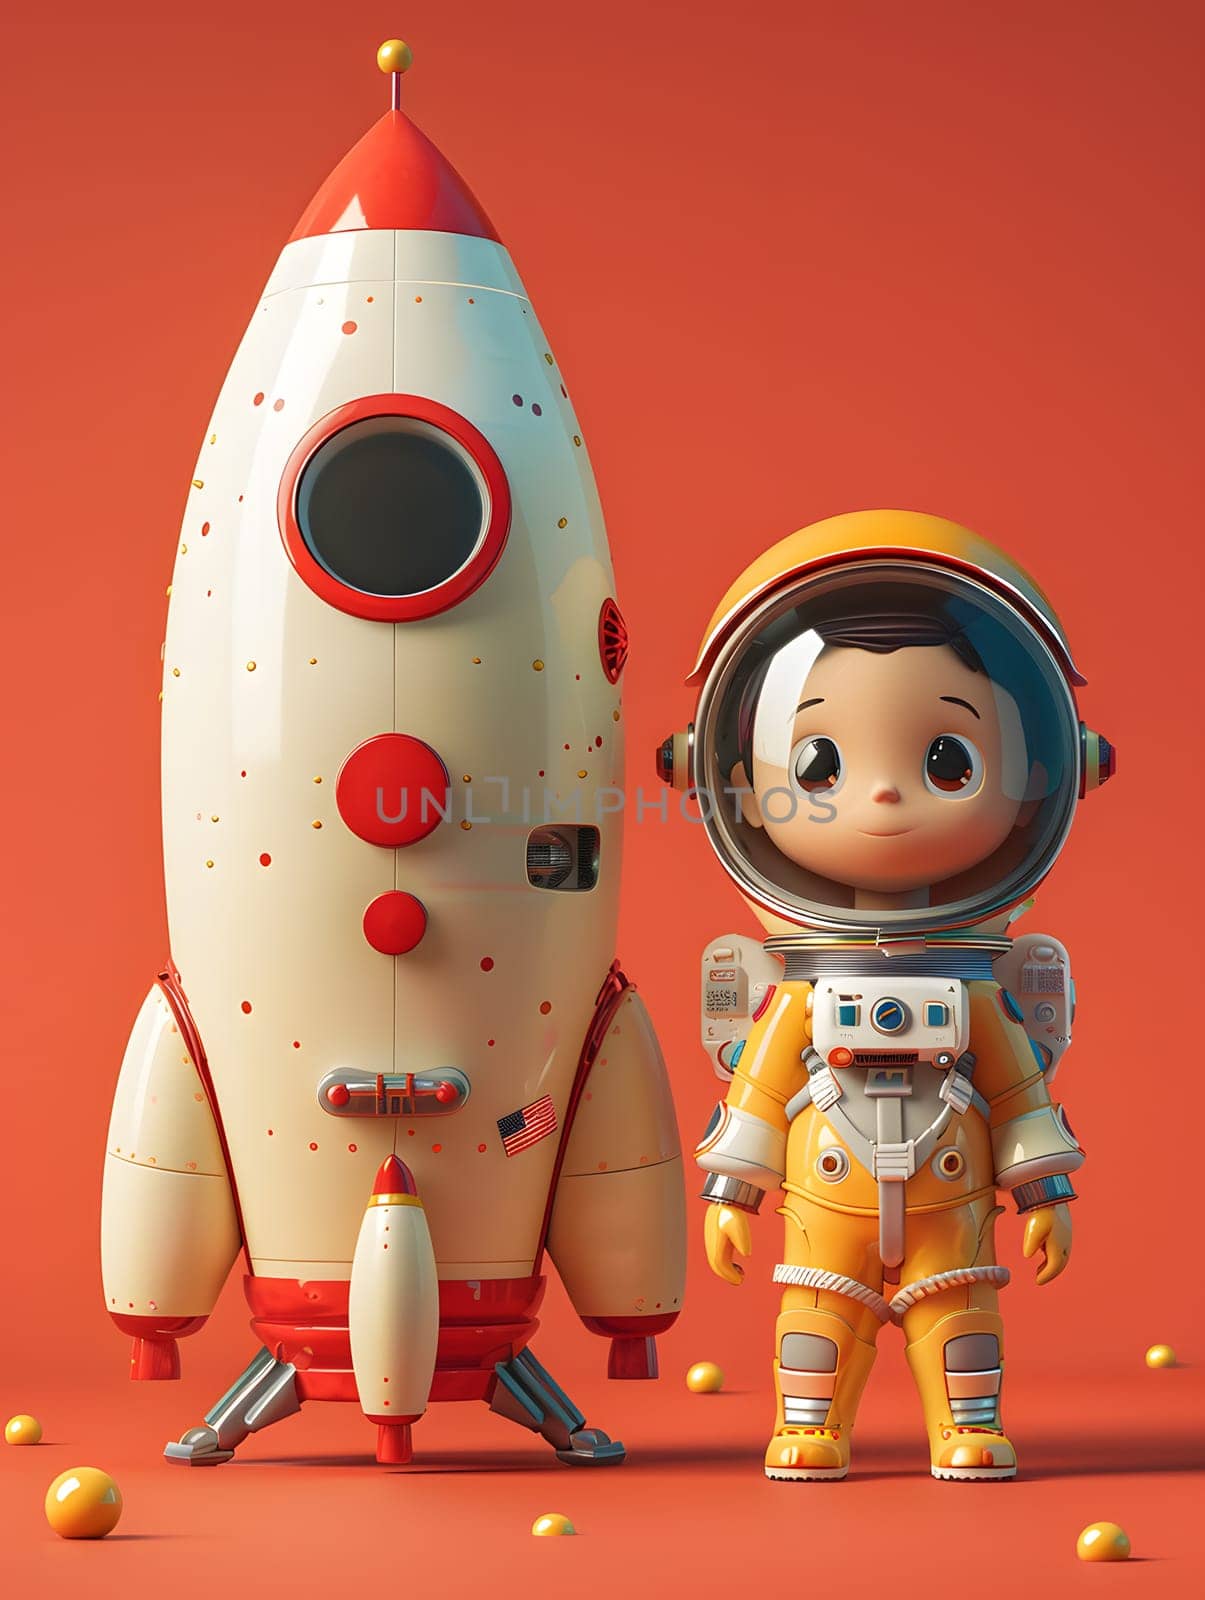 An miniature astronaut figurine is positioned beside a toy rocket, creating an artistic and imaginative scene perfect for a spacethemed event